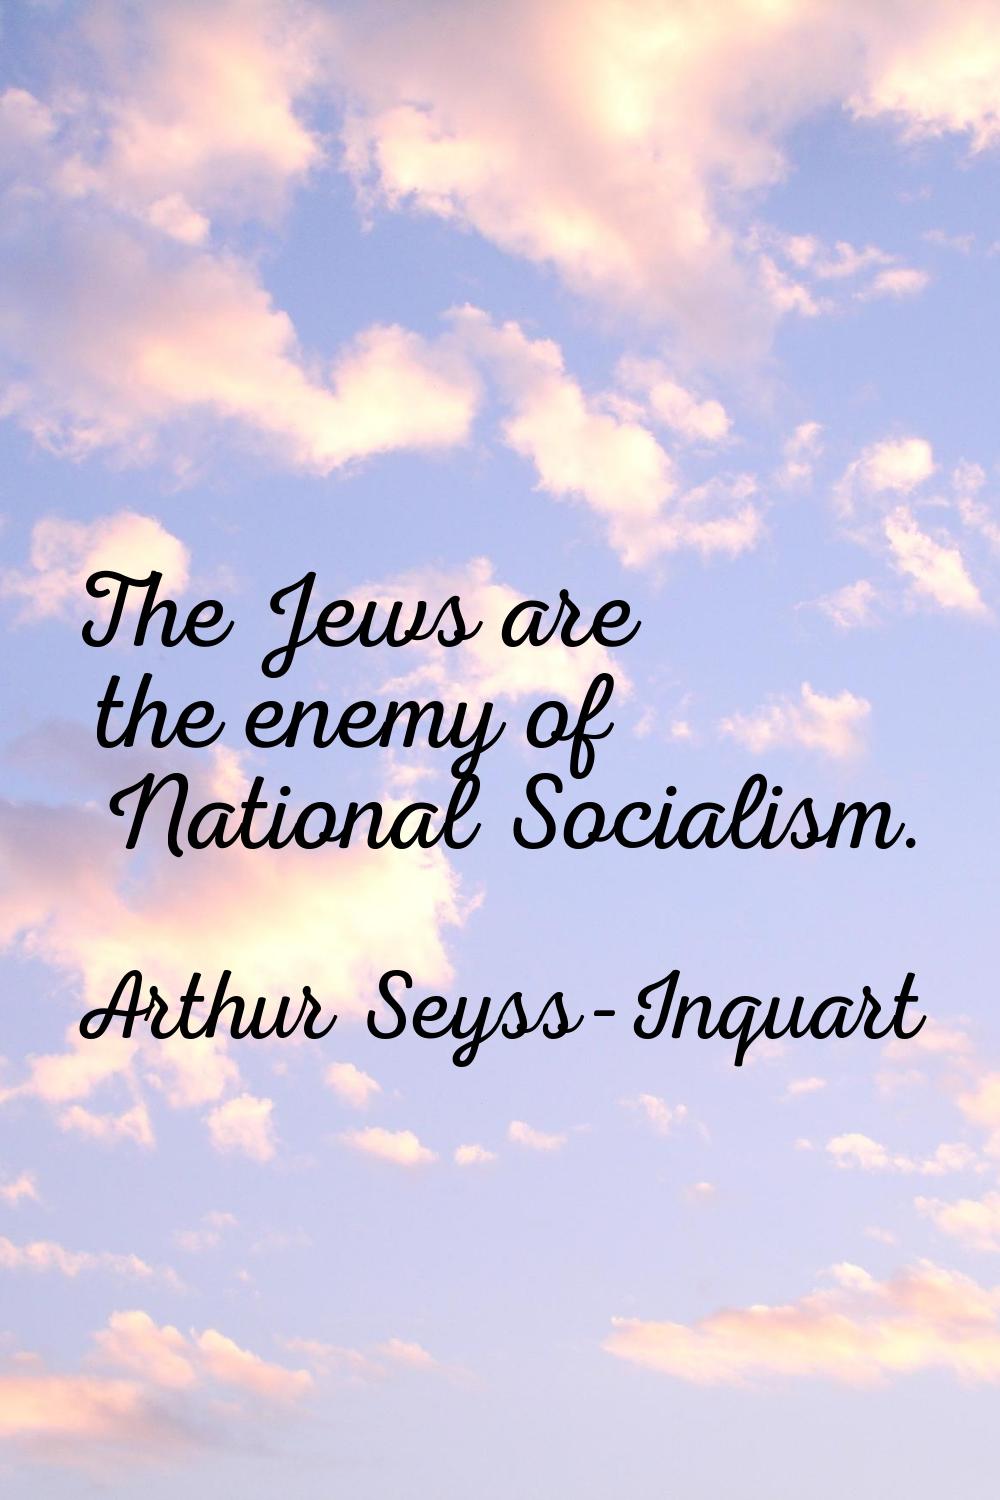 The Jews are the enemy of National Socialism.